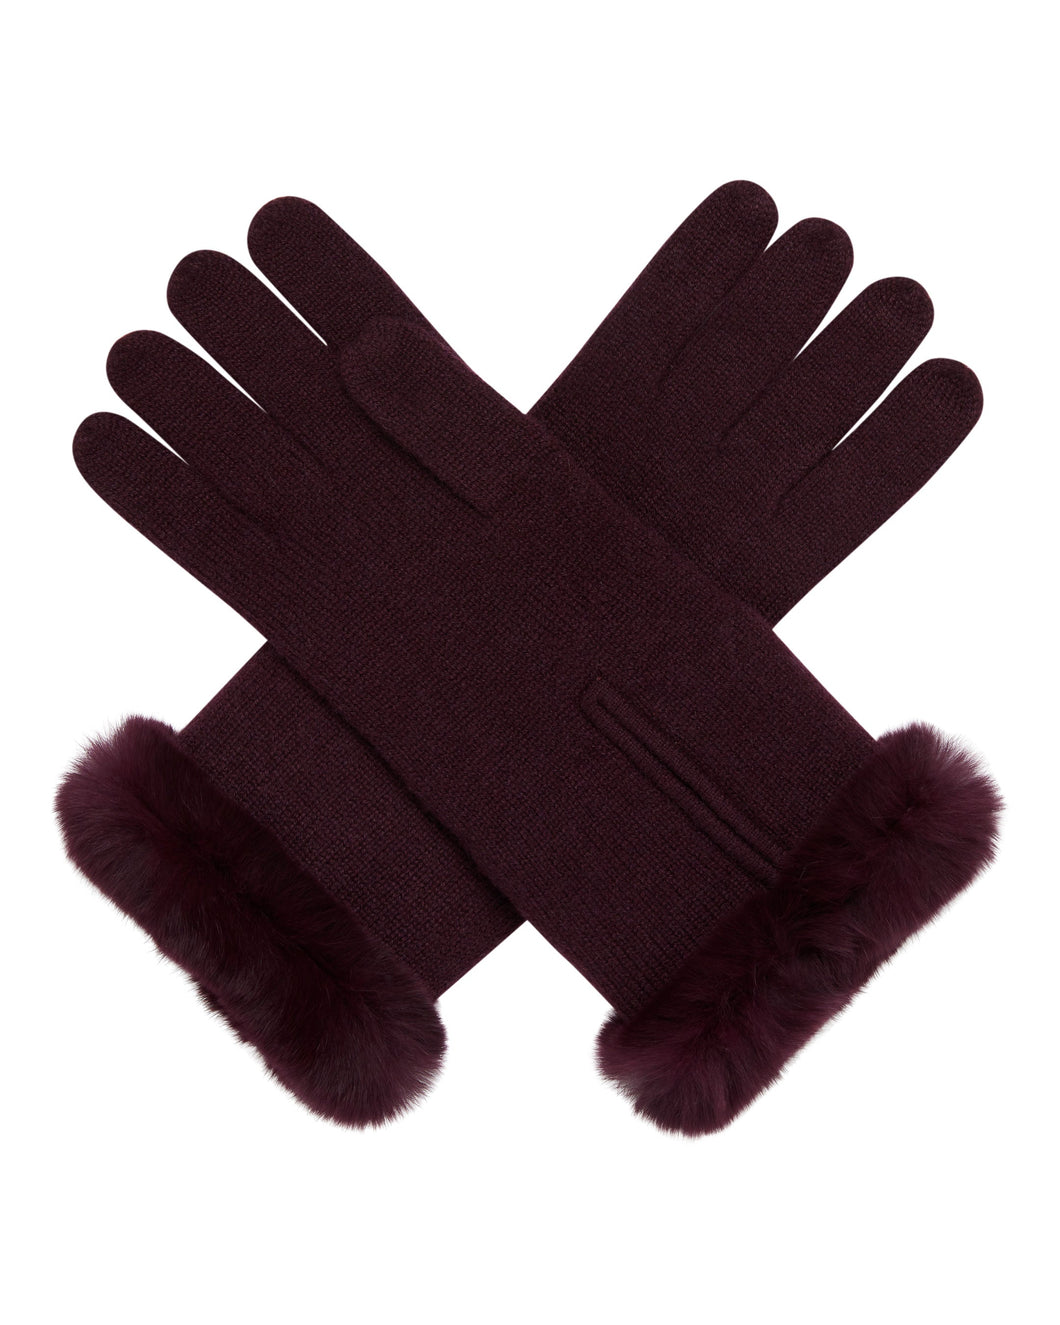 N.Peal Women's Fur And Cashmere Gloves Plum Purple